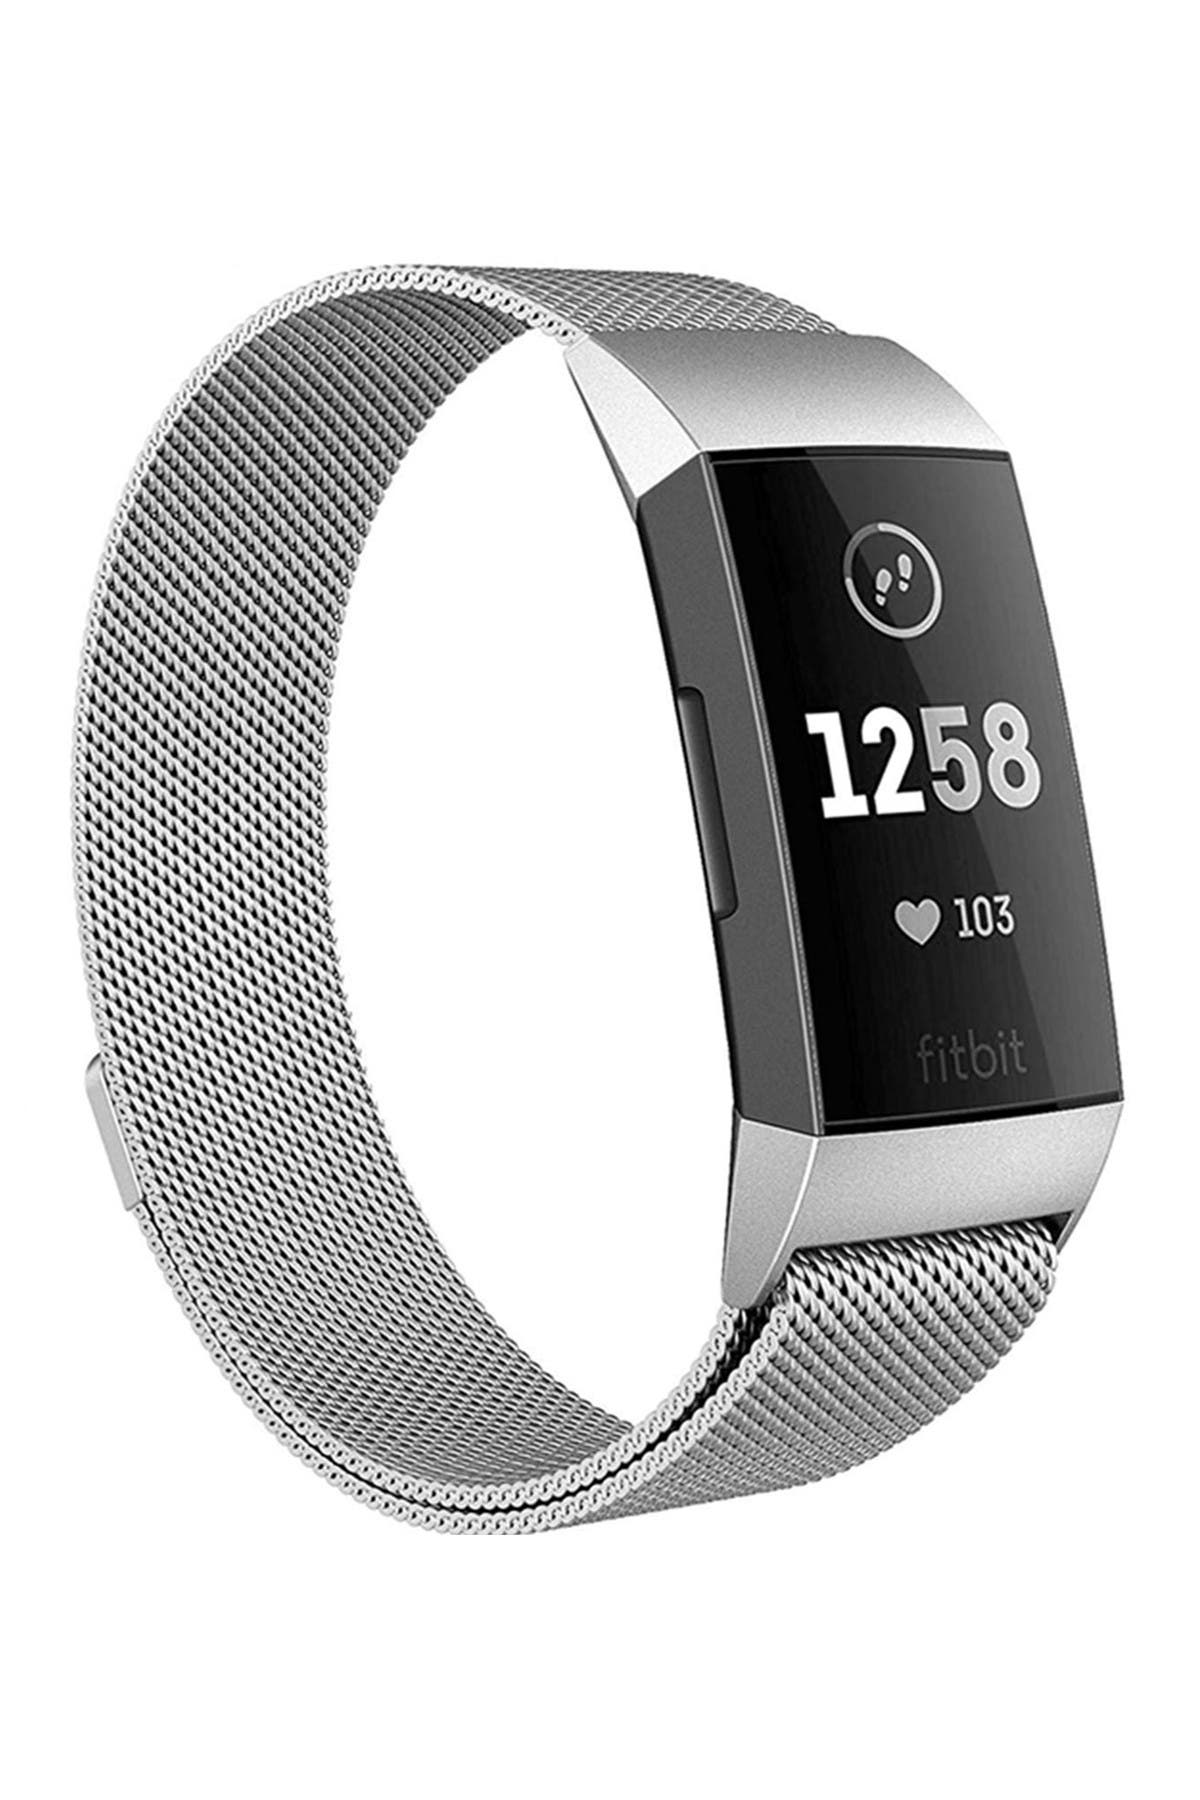 fitbit charge 3 stainless steel band